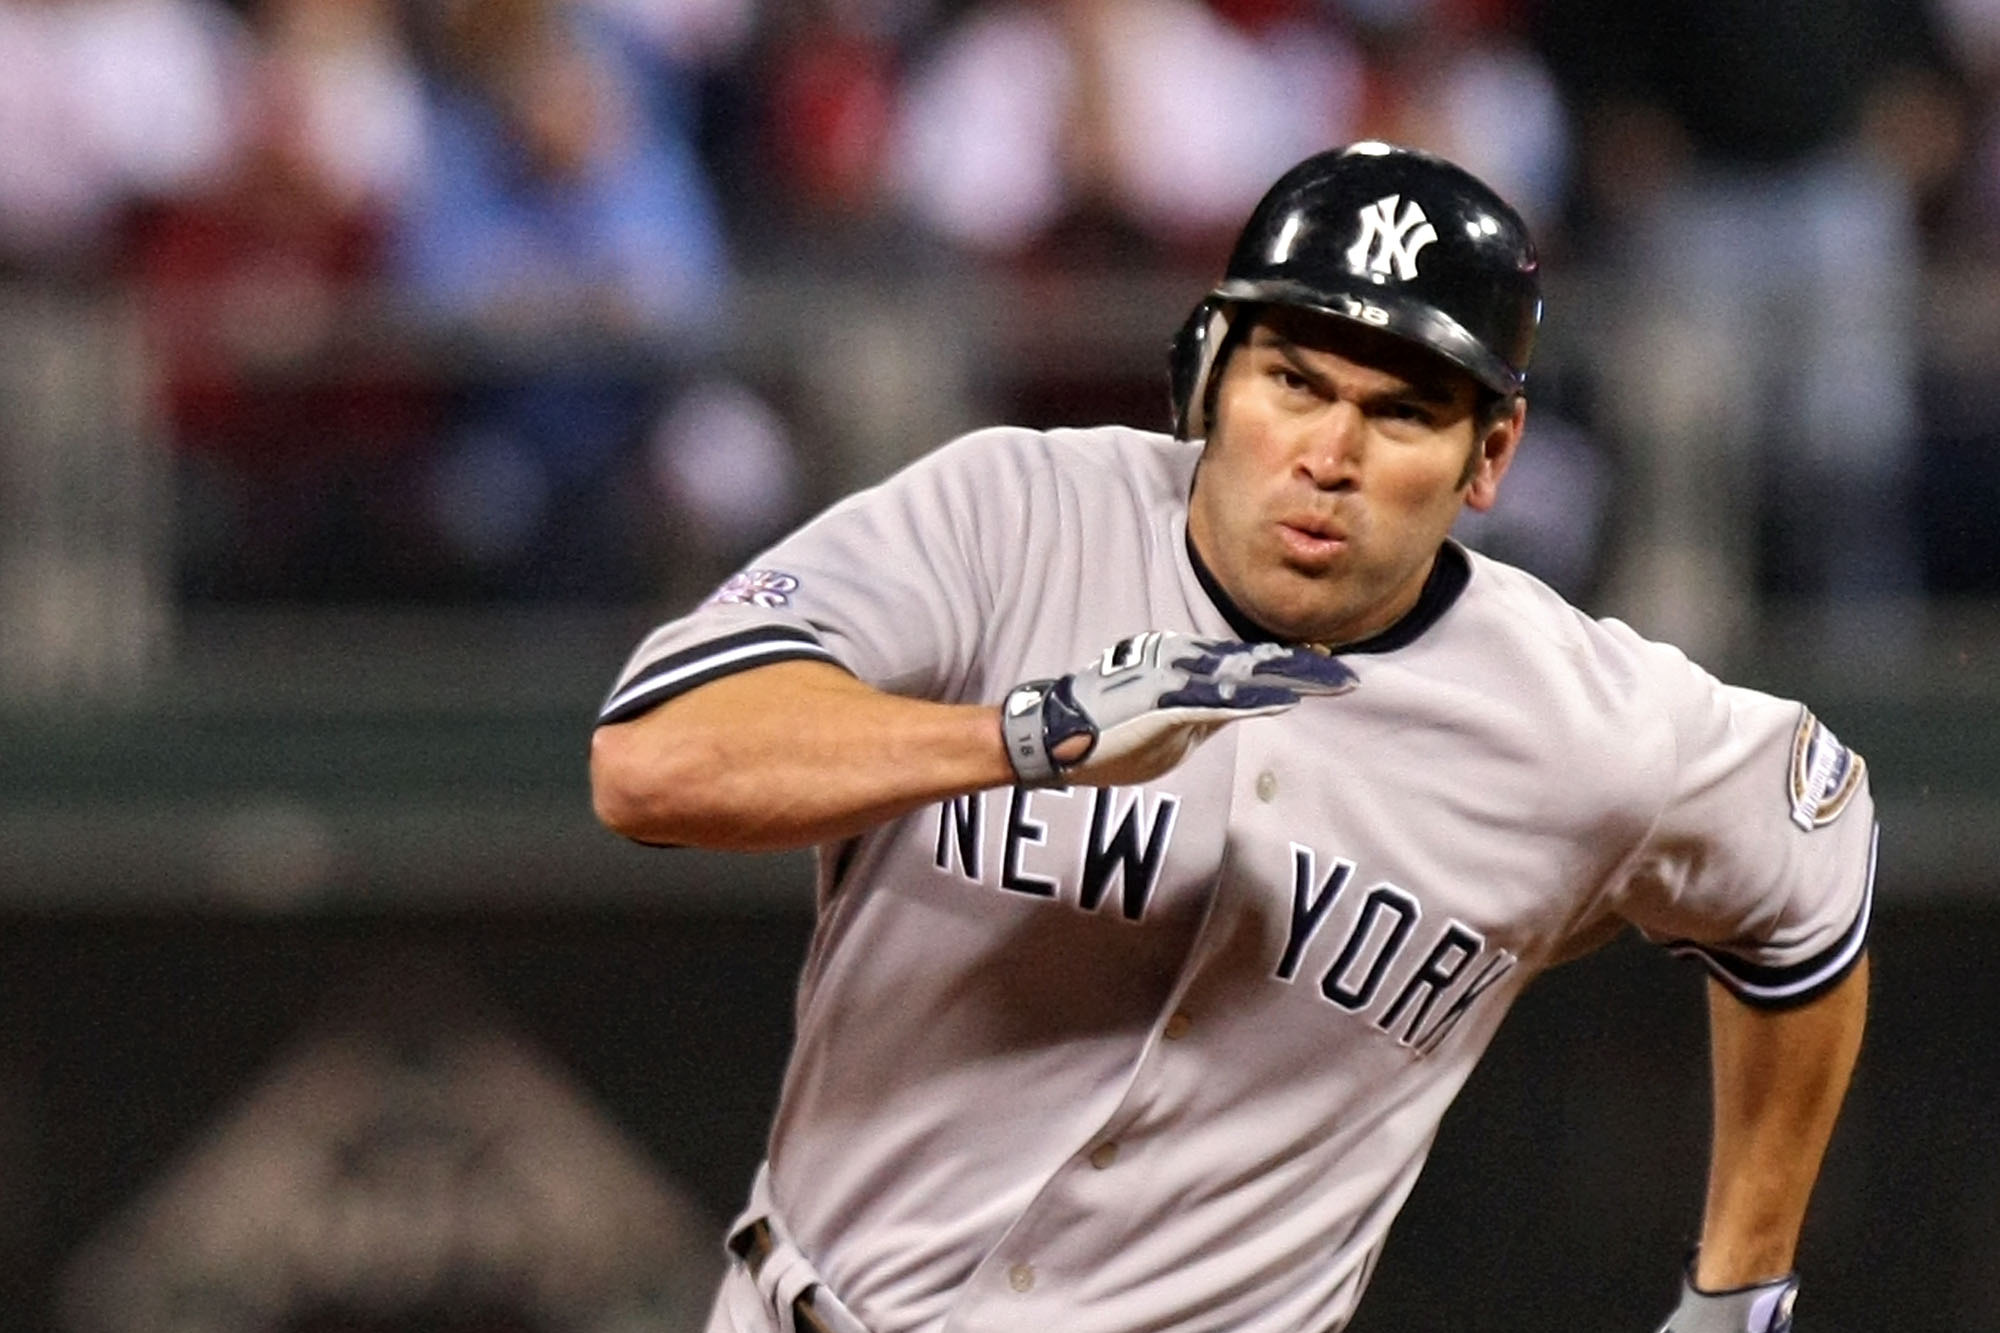 Johnny Damon's Delusional Belief That He Belongs in the Hall of